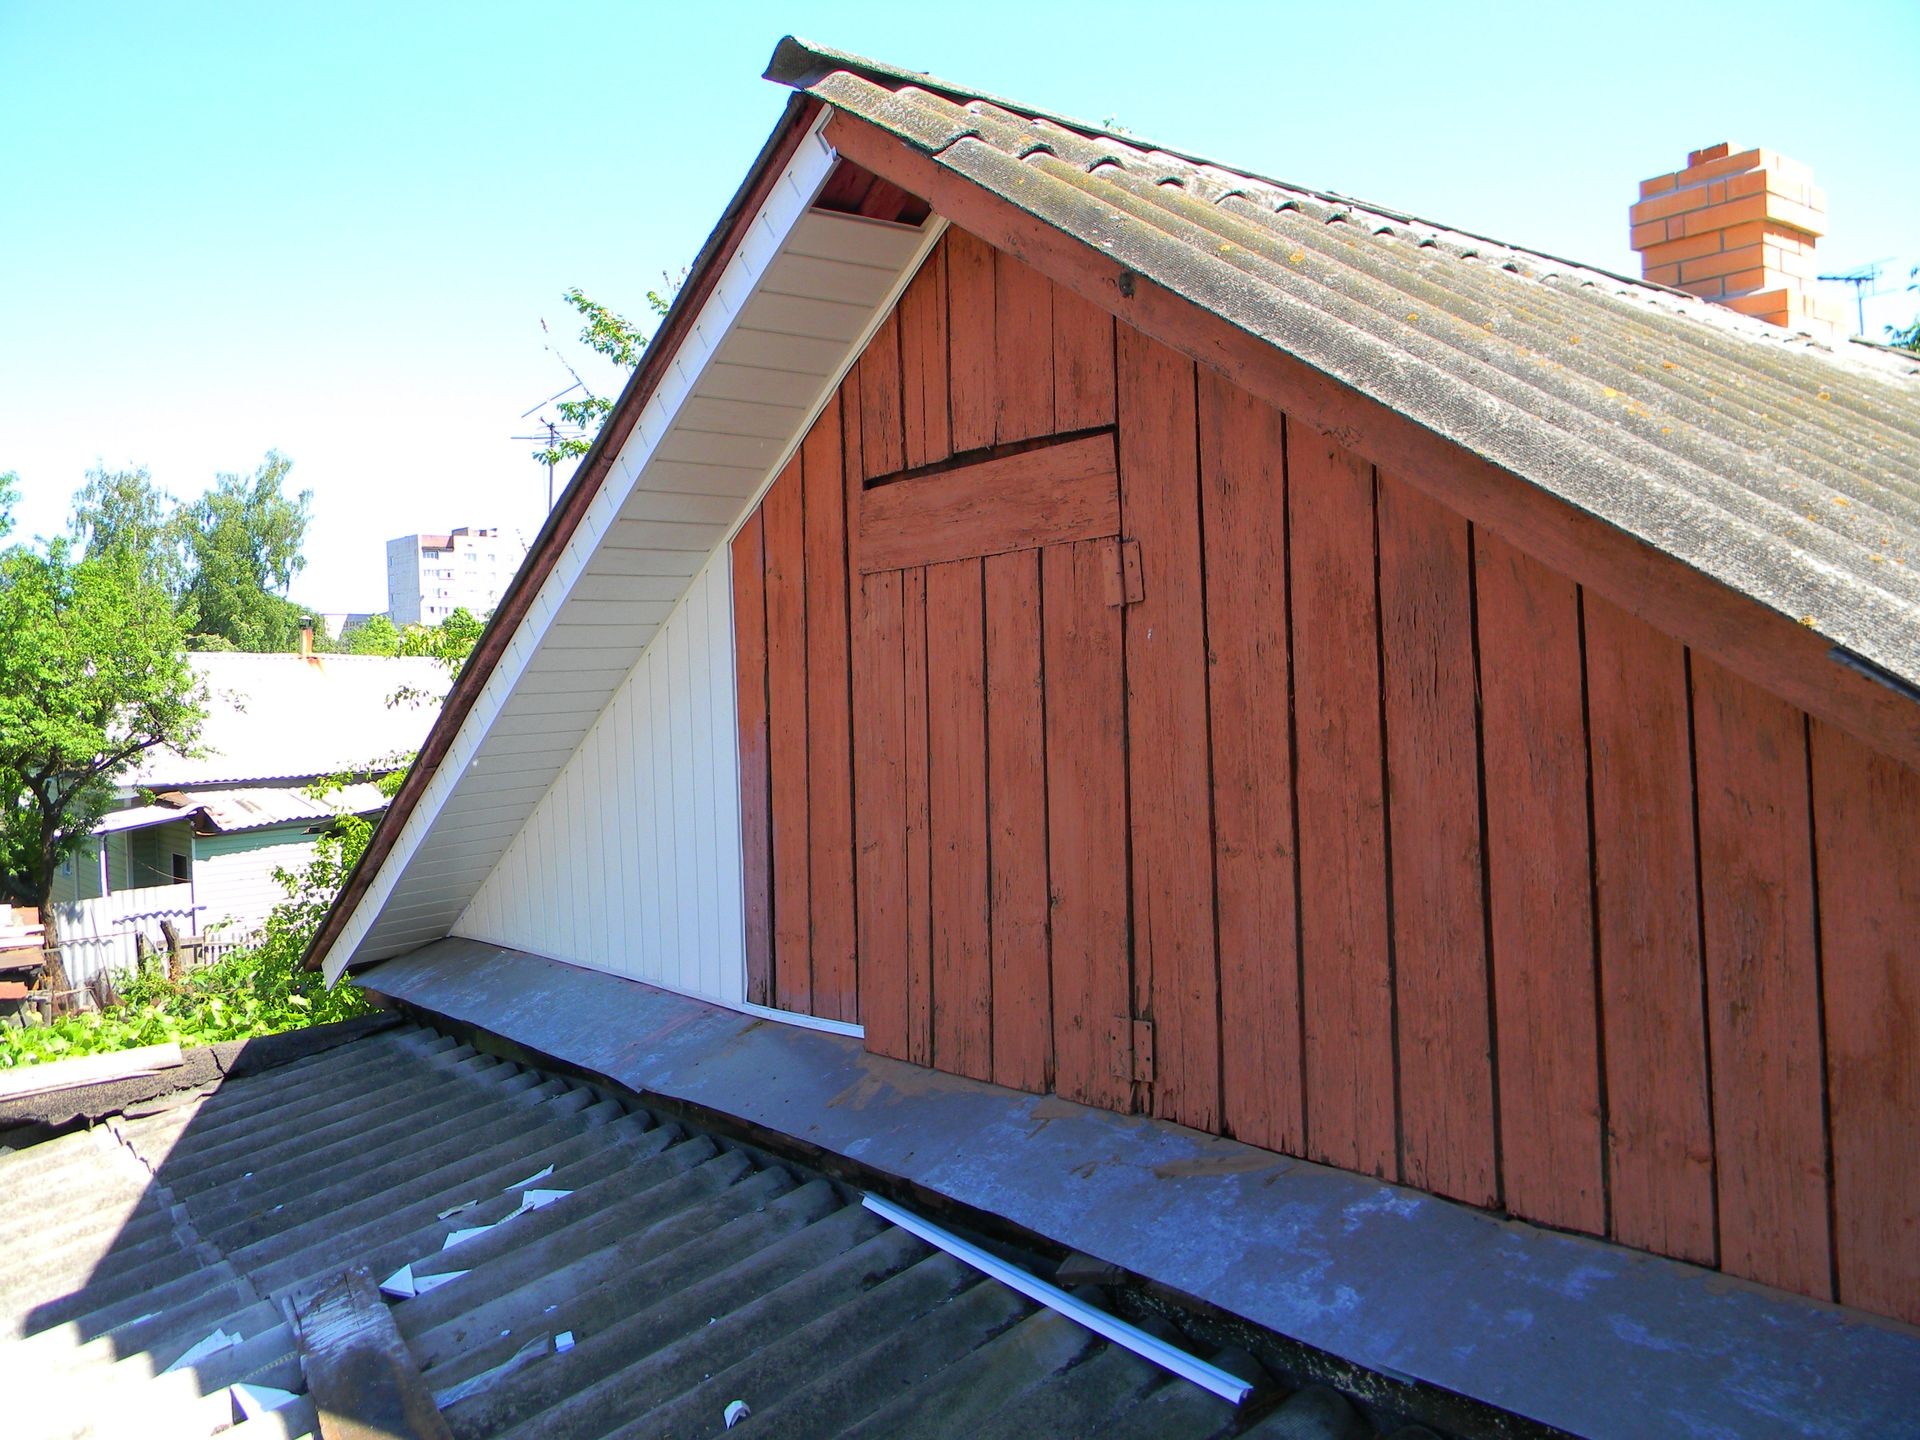 Old house with asbestos roof renovation with plastic siding installation.